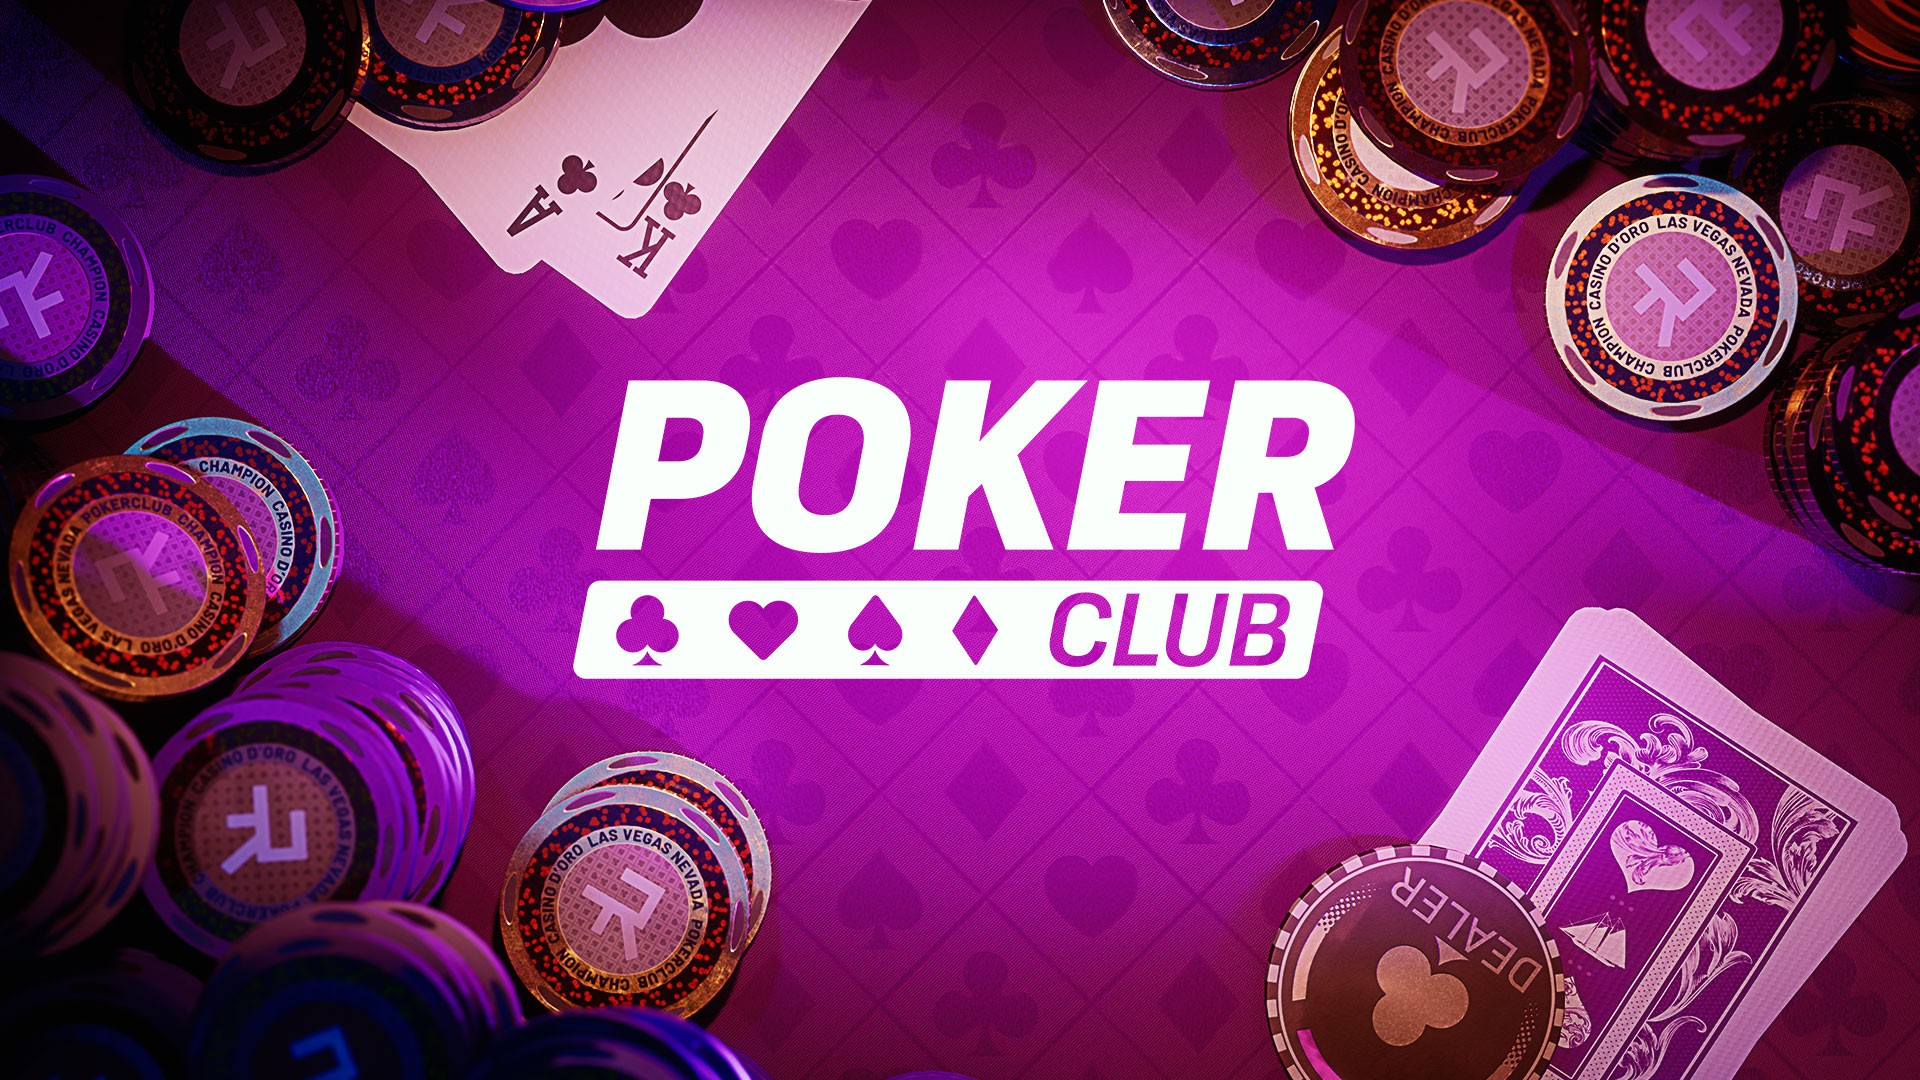 Video For Poker Club Checks in on Xbox Series X and Xbox One This Year